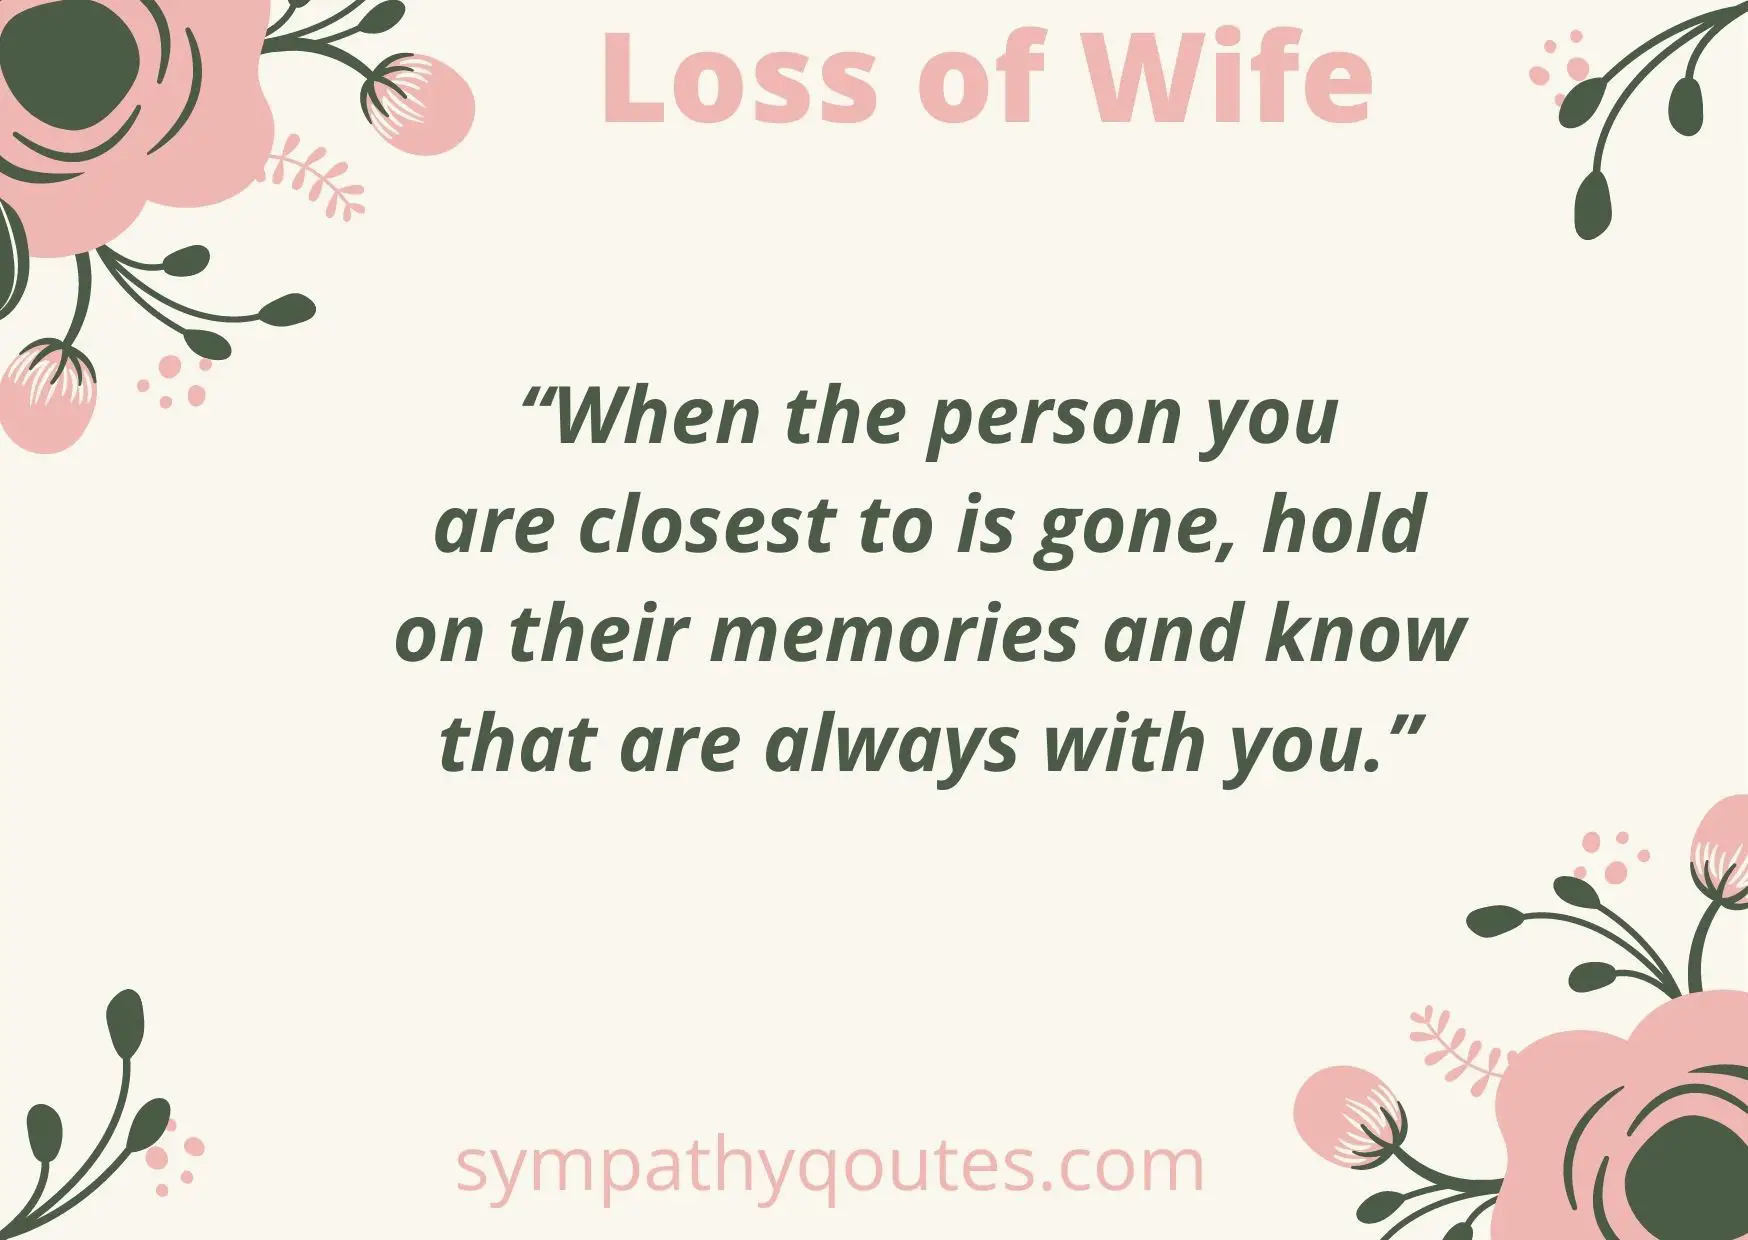 Sympathy Quotes for Loss of Wife